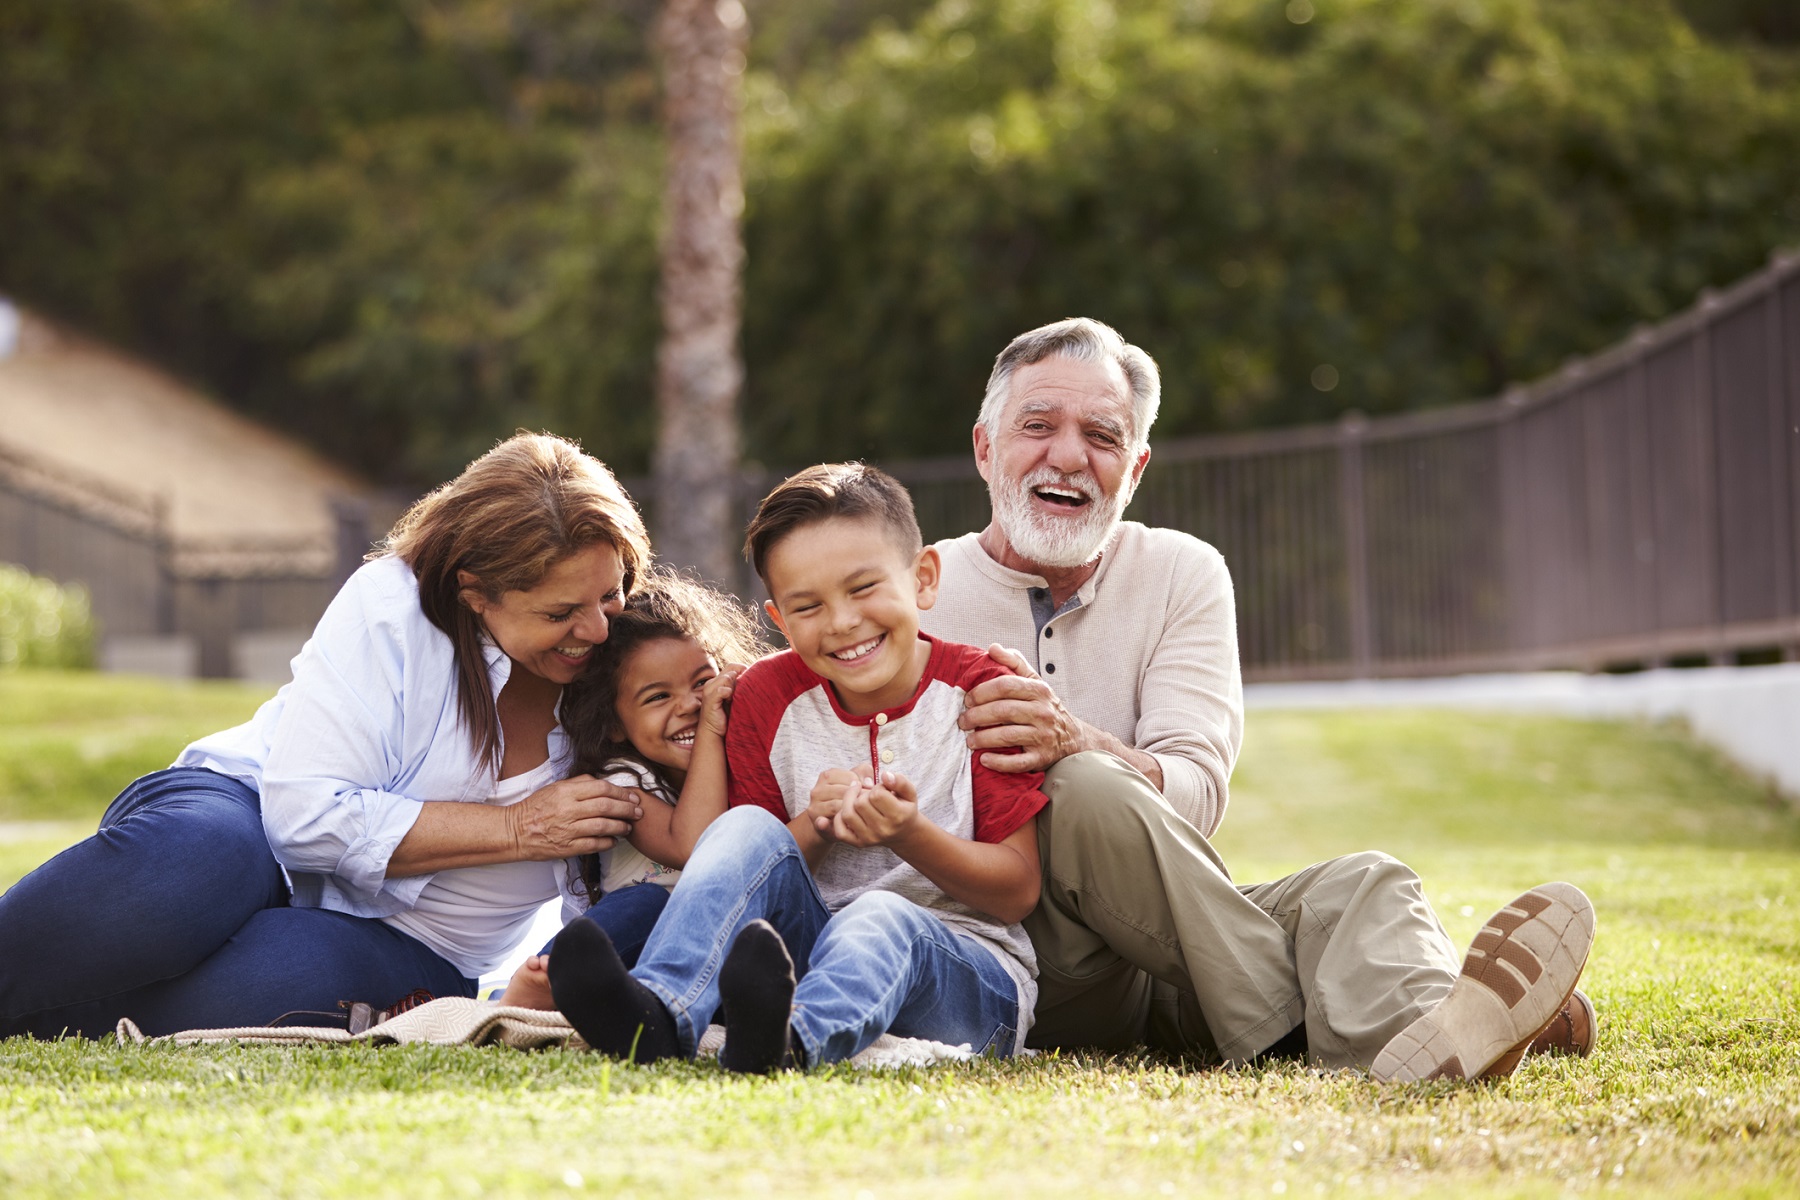 Grandparents sitting on the grass in the park with their grandchildren laughing